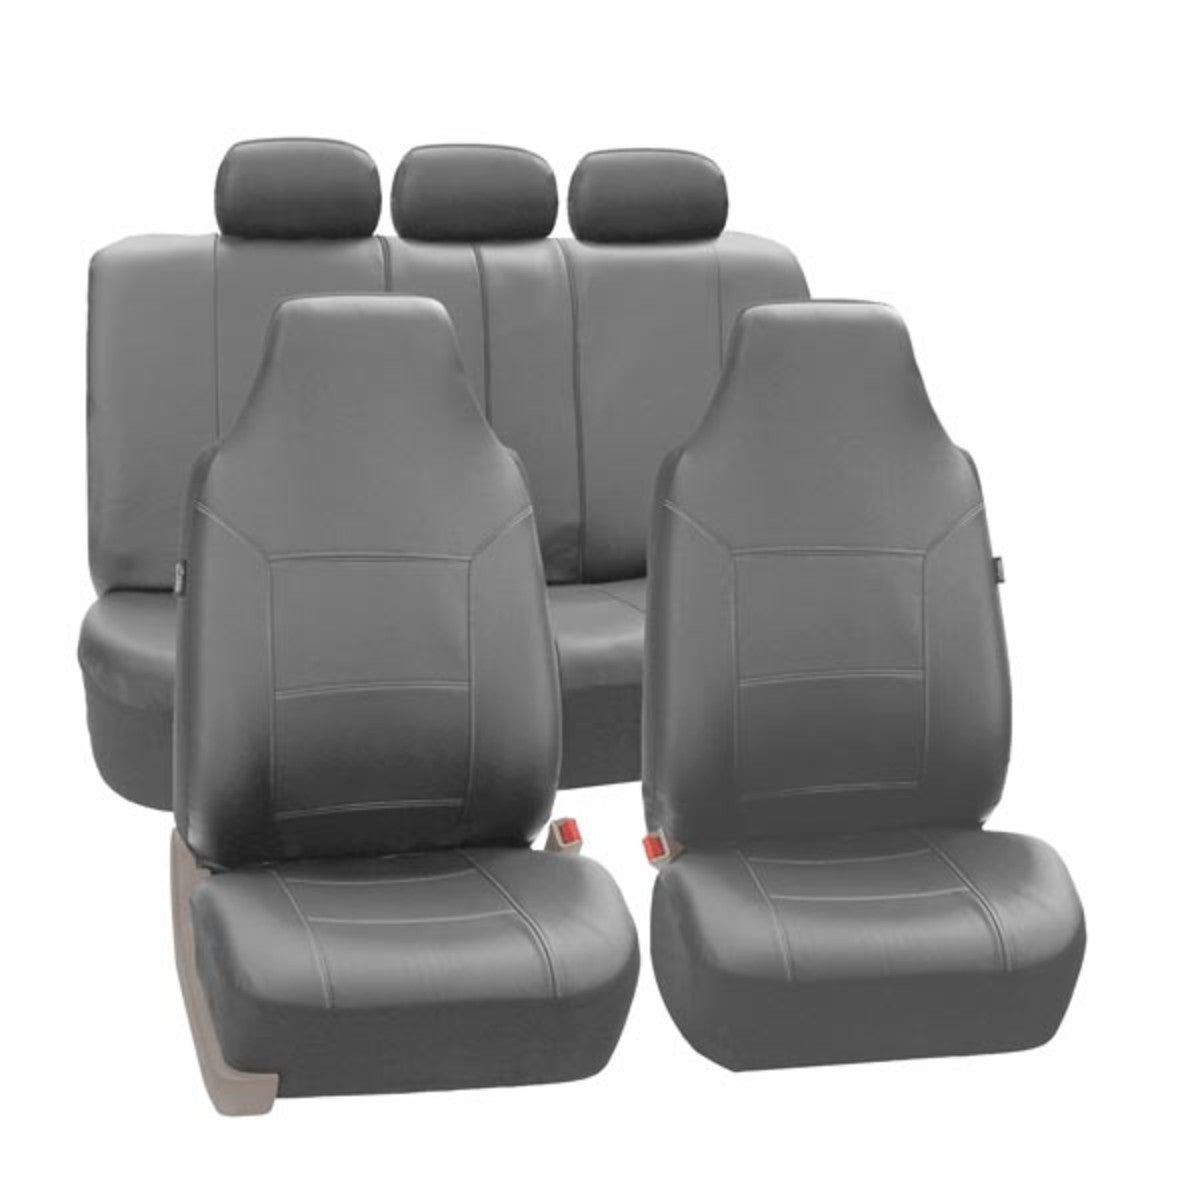 Royal PU Leather Seat Covers Full Set Gray